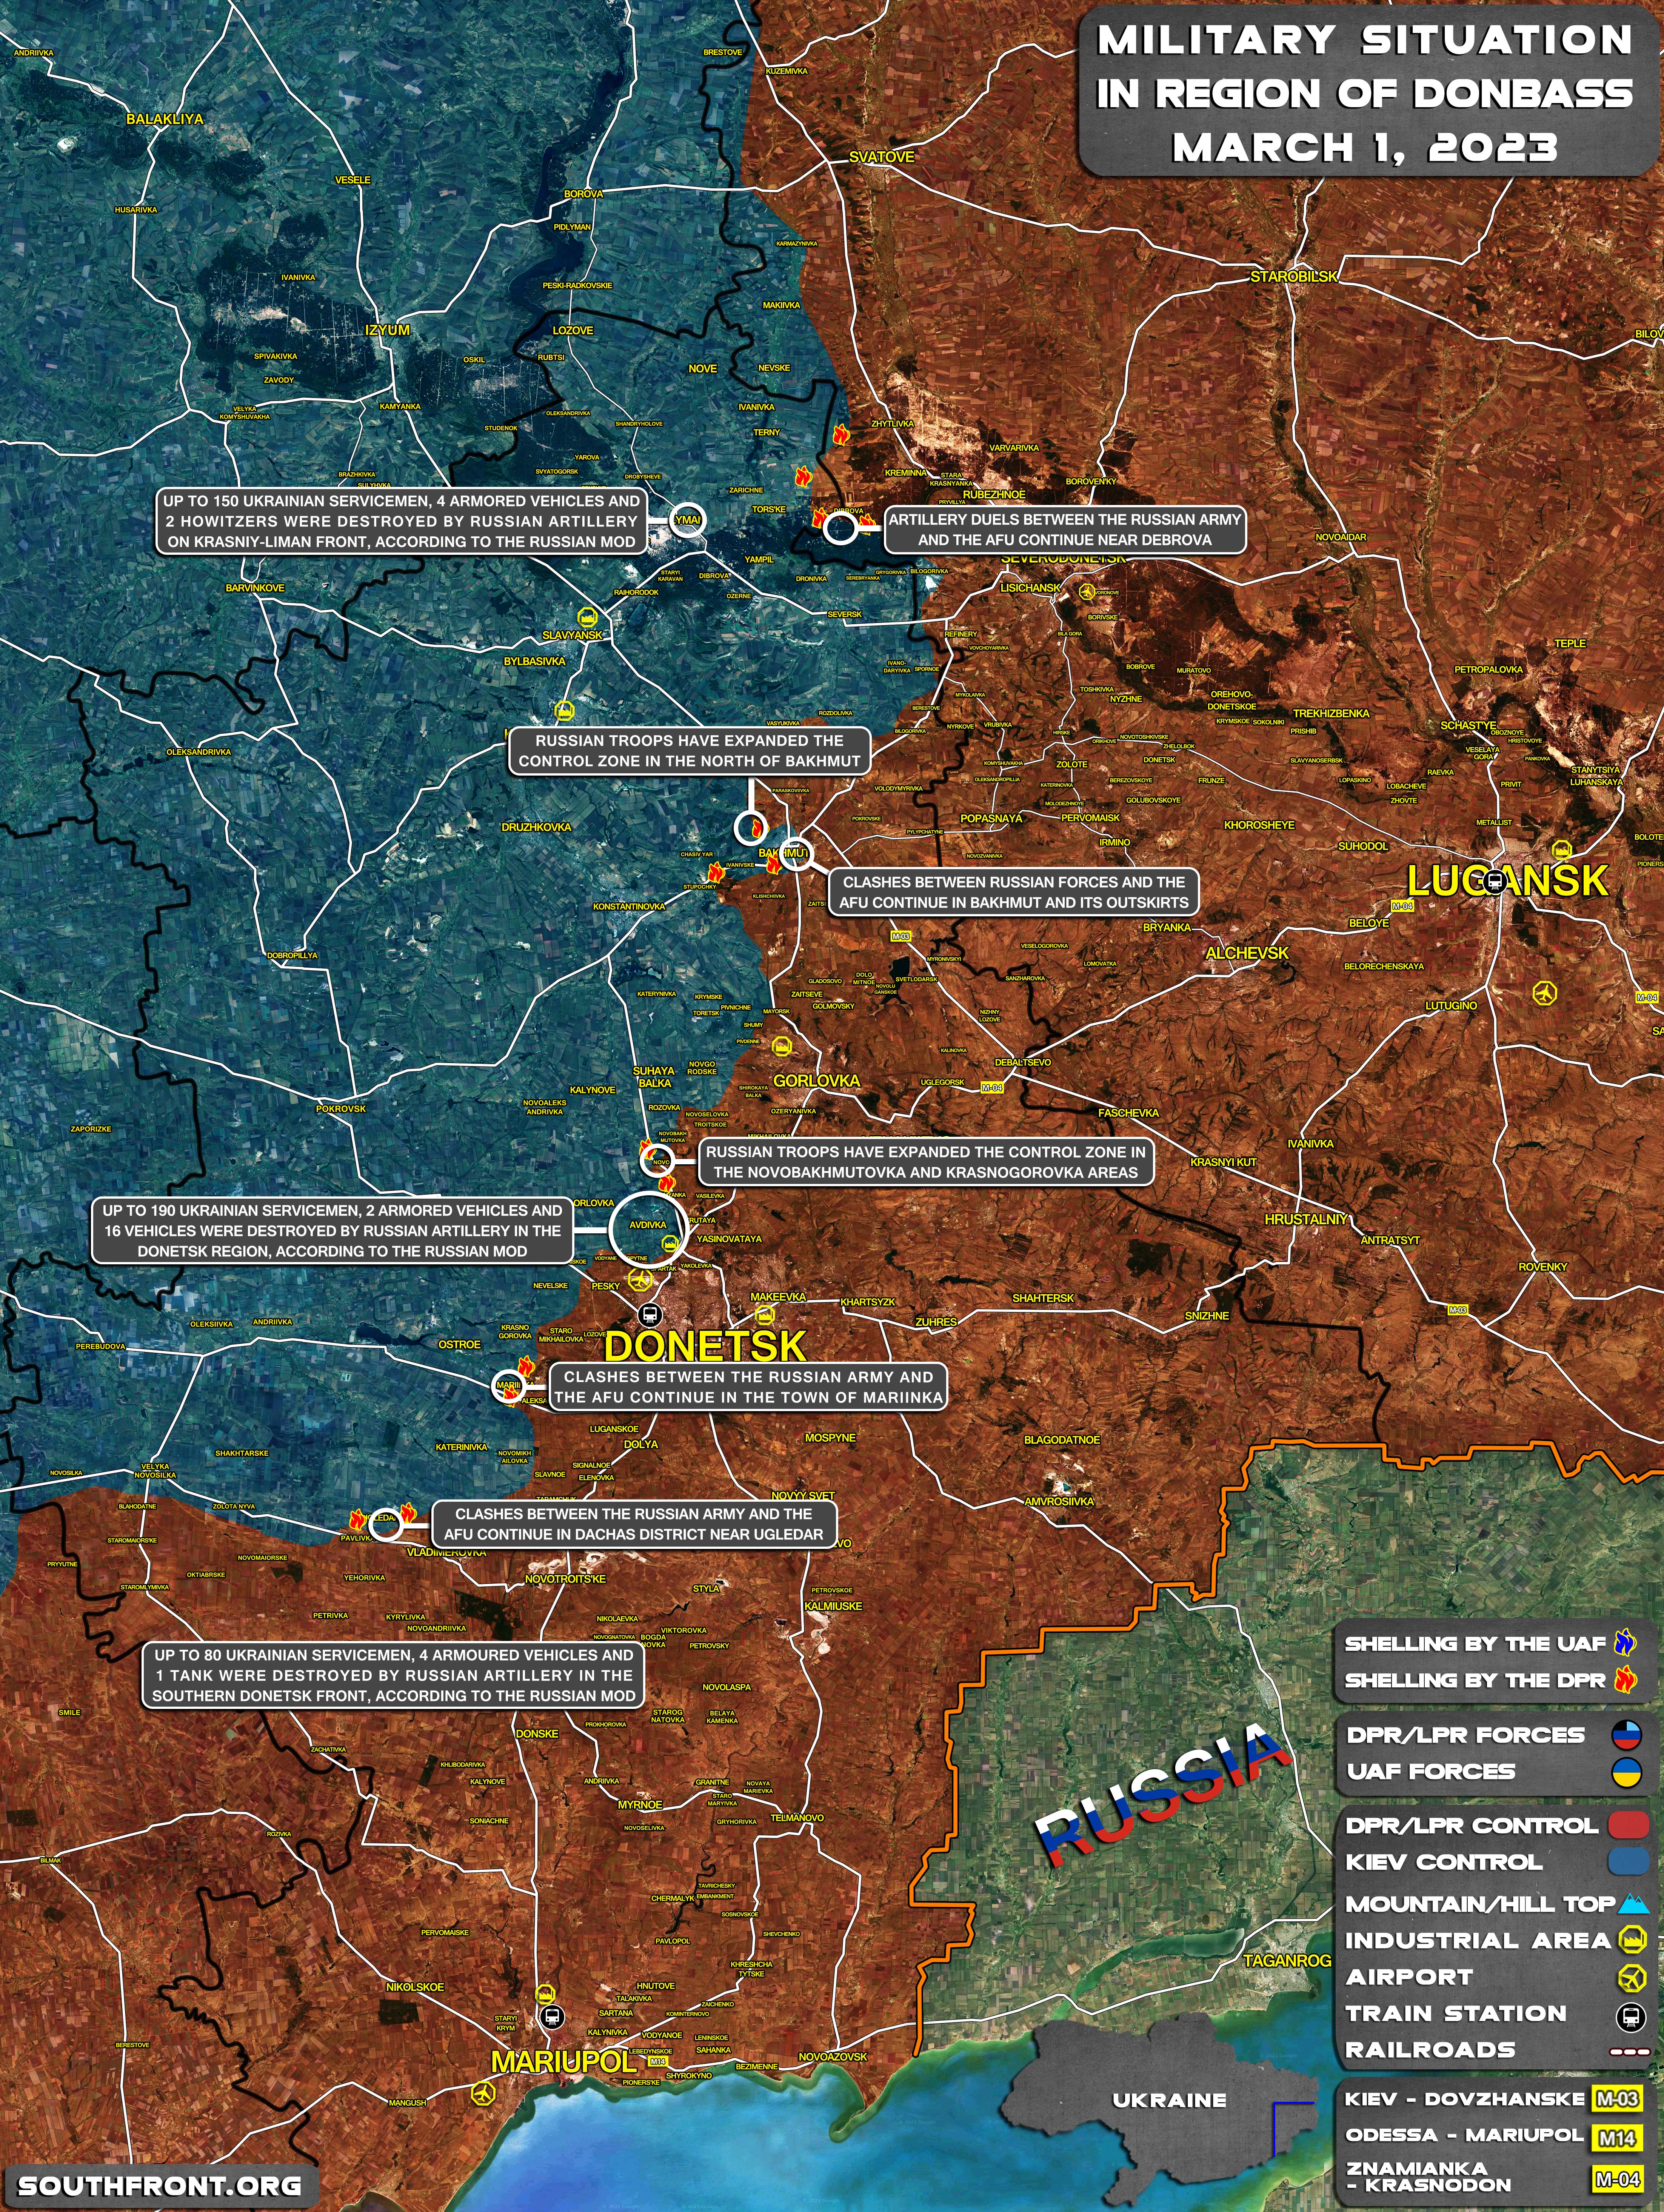 1march2023_Military_Situation_in_region_of_Donbass.jpg